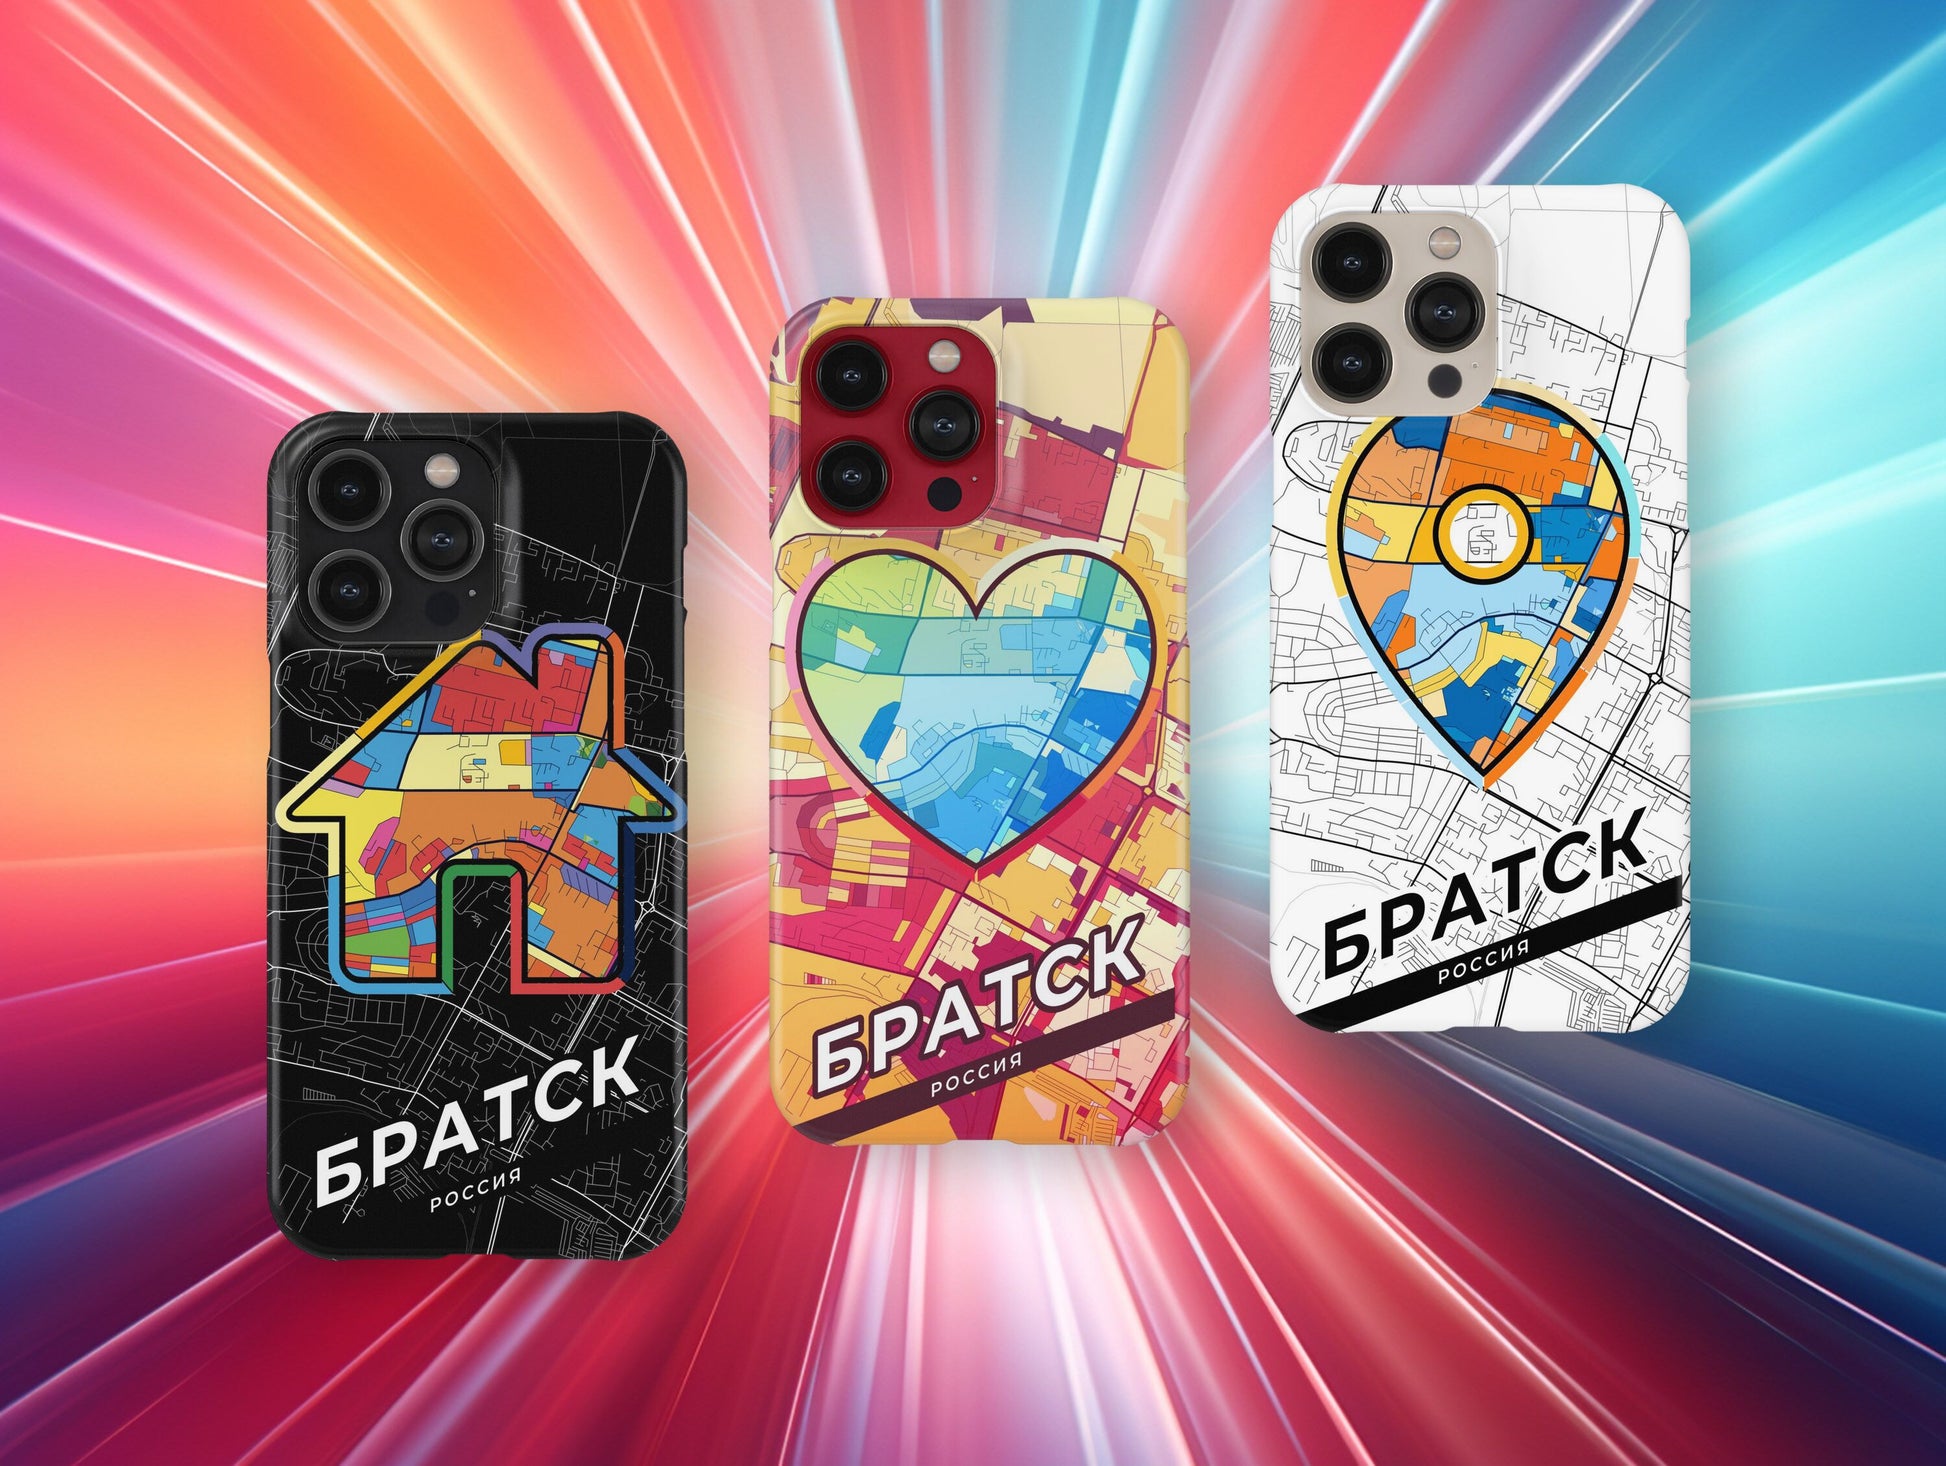 Bratsk Russia slim phone case with colorful icon. Birthday, wedding or housewarming gift. Couple match cases.